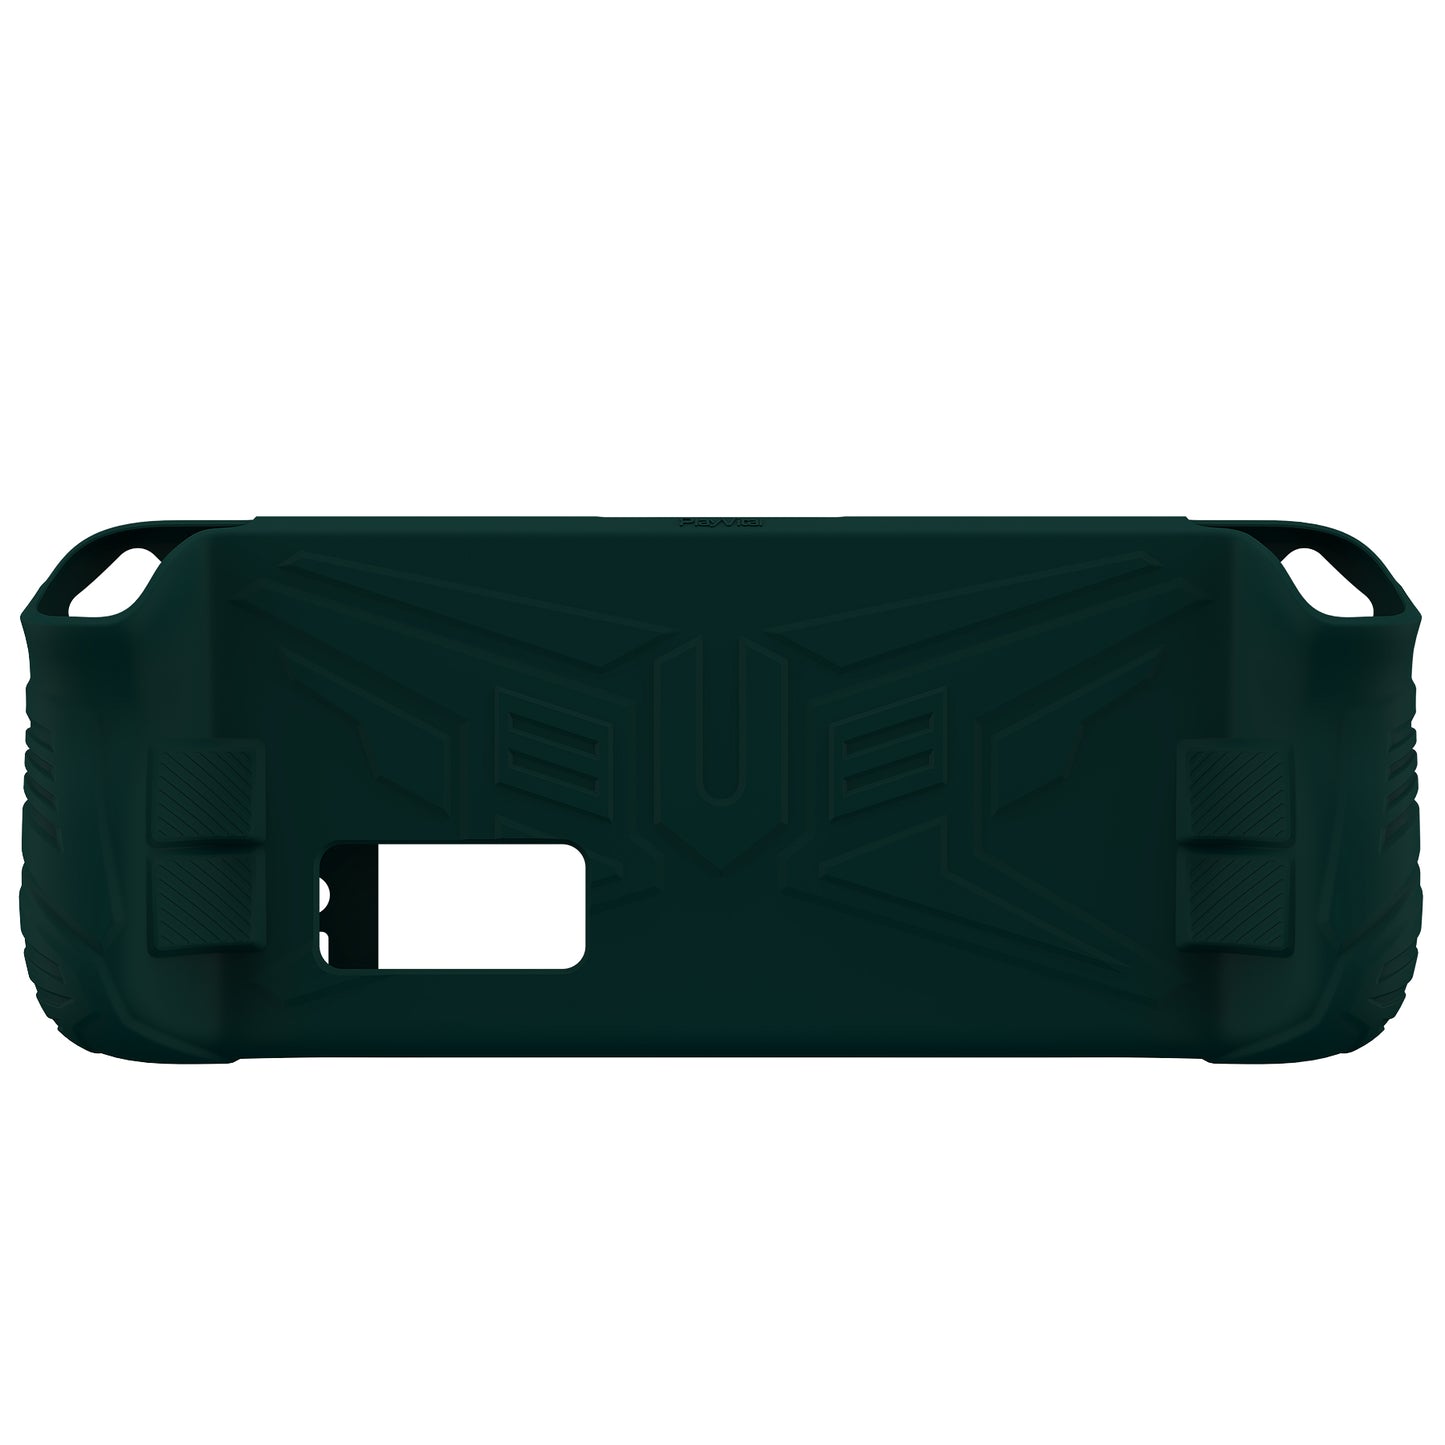 PlayVital Armor Series Protective Case for Steam Deck LCD, Soft Cover Silicone Protector for Steam Deck with Back Button Enhancement Designed & Thumb Grips Caps - Racing Green - XFSDP007 PlayVital